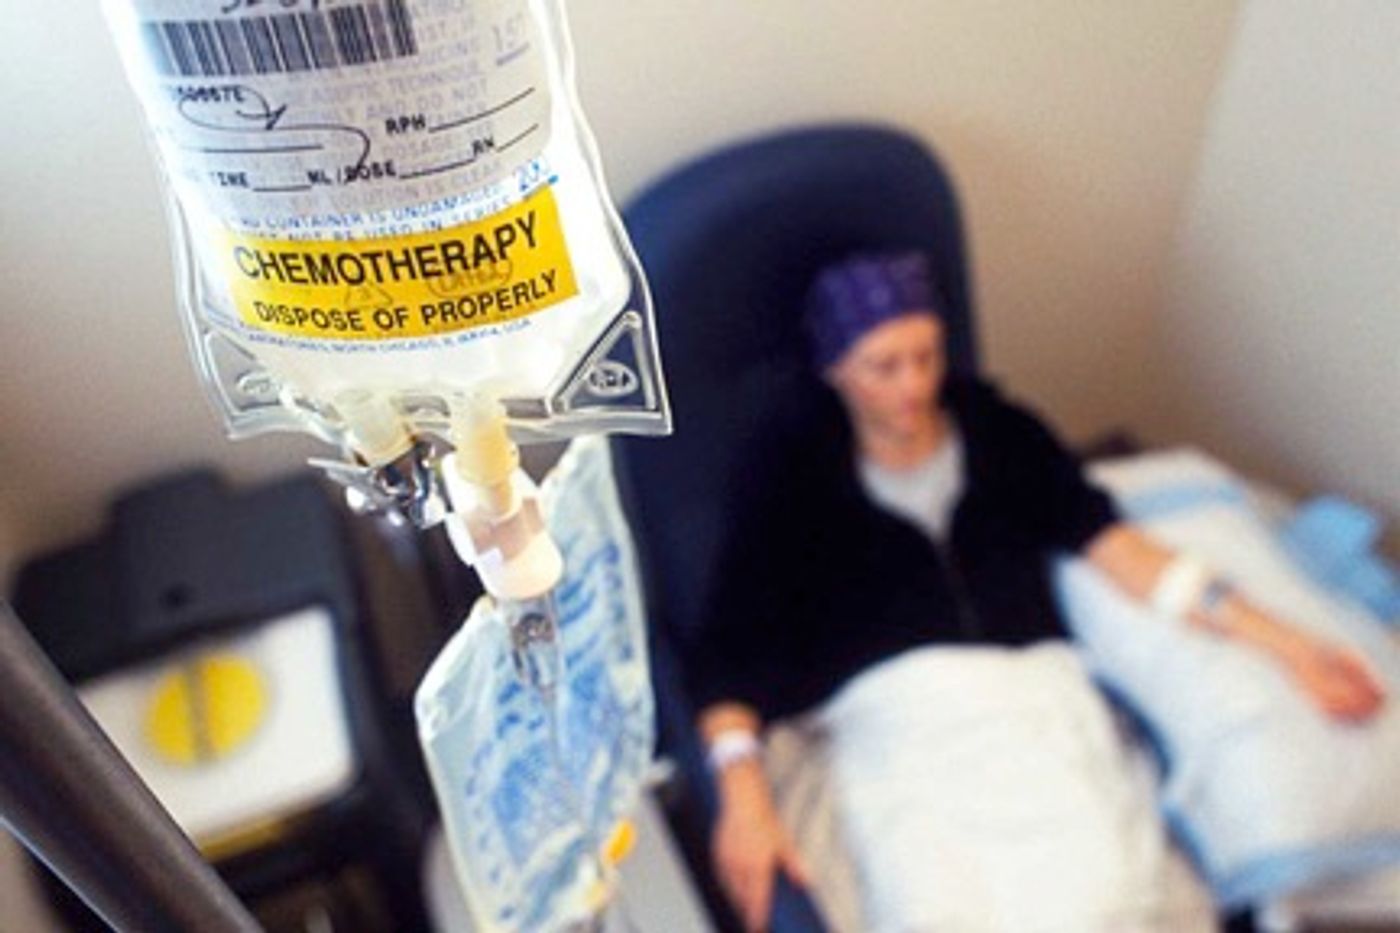 Genetic test reveals chemo is not necessary for all breast cancer patients